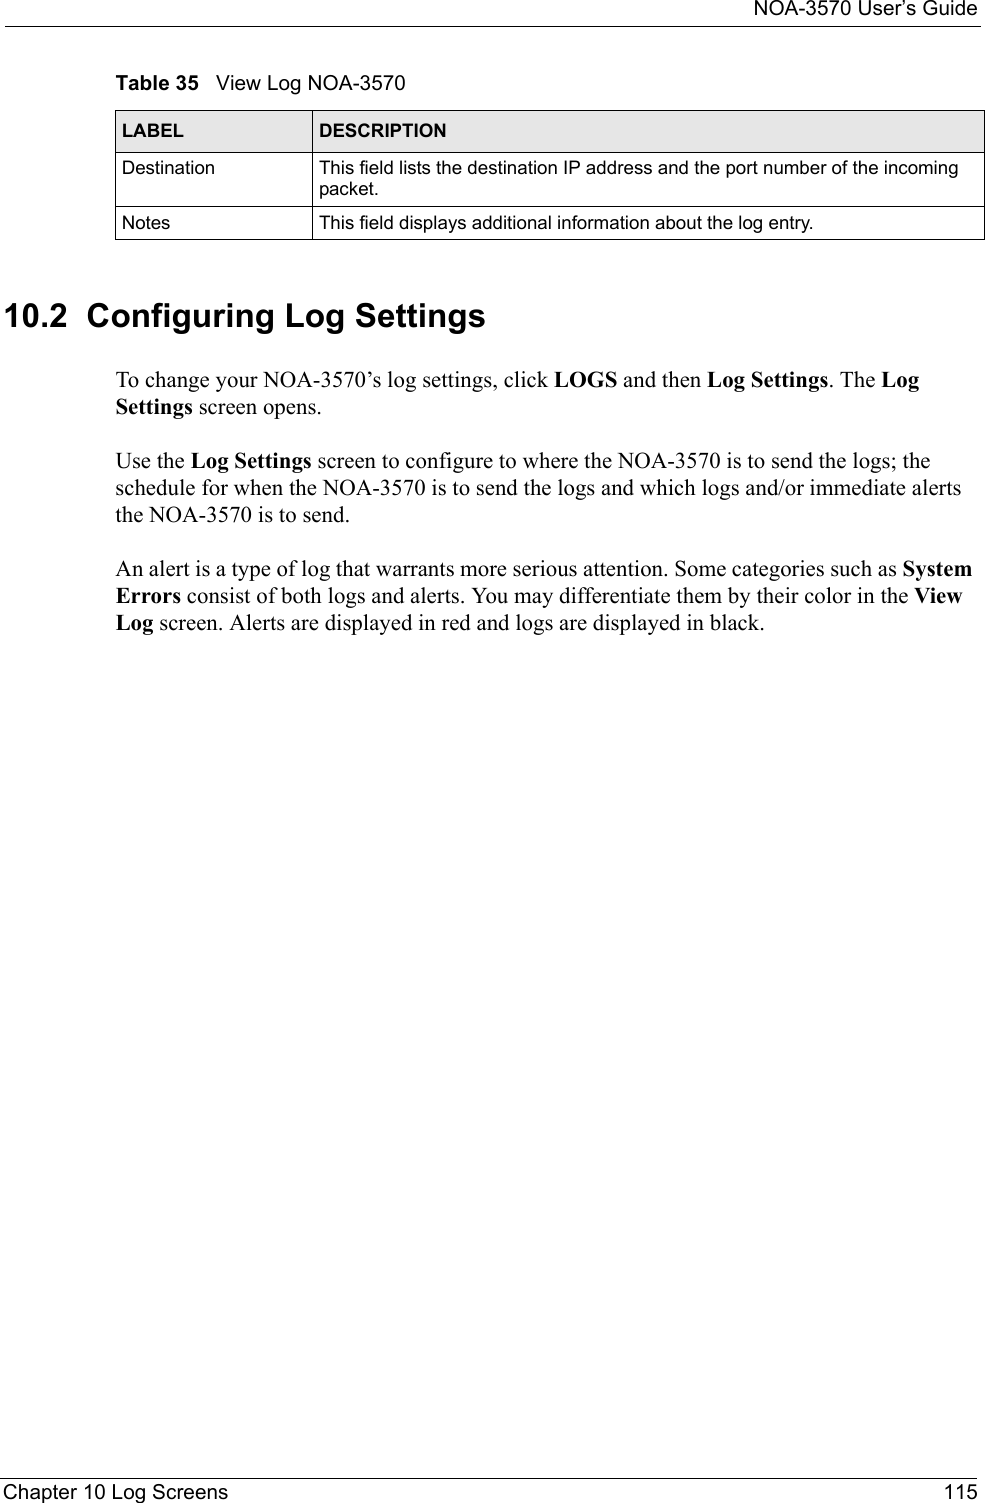 NOA-3570 User’s GuideChapter 10 Log Screens 11510.2  Configuring Log SettingsTo change your NOA-3570’s log settings, click LOGS and then Log Settings. The Log Settings screen opens. Use the Log Settings screen to configure to where the NOA-3570 is to send the logs; the schedule for when the NOA-3570 is to send the logs and which logs and/or immediate alerts the NOA-3570 is to send. An alert is a type of log that warrants more serious attention. Some categories such as System Errors consist of both logs and alerts. You may differentiate them by their color in the View Log screen. Alerts are displayed in red and logs are displayed in black.Destination  This field lists the destination IP address and the port number of the incoming packet.Notes This field displays additional information about the log entry. Table 35   View Log NOA-3570LABEL DESCRIPTION